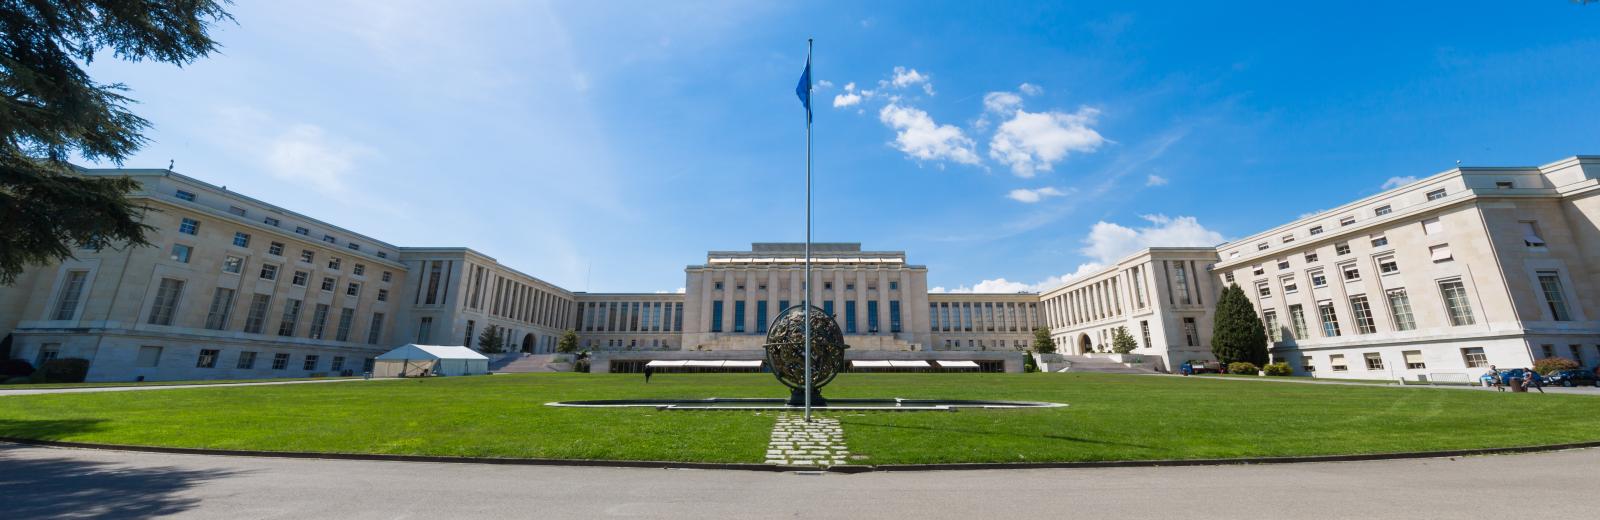 Palace of nations